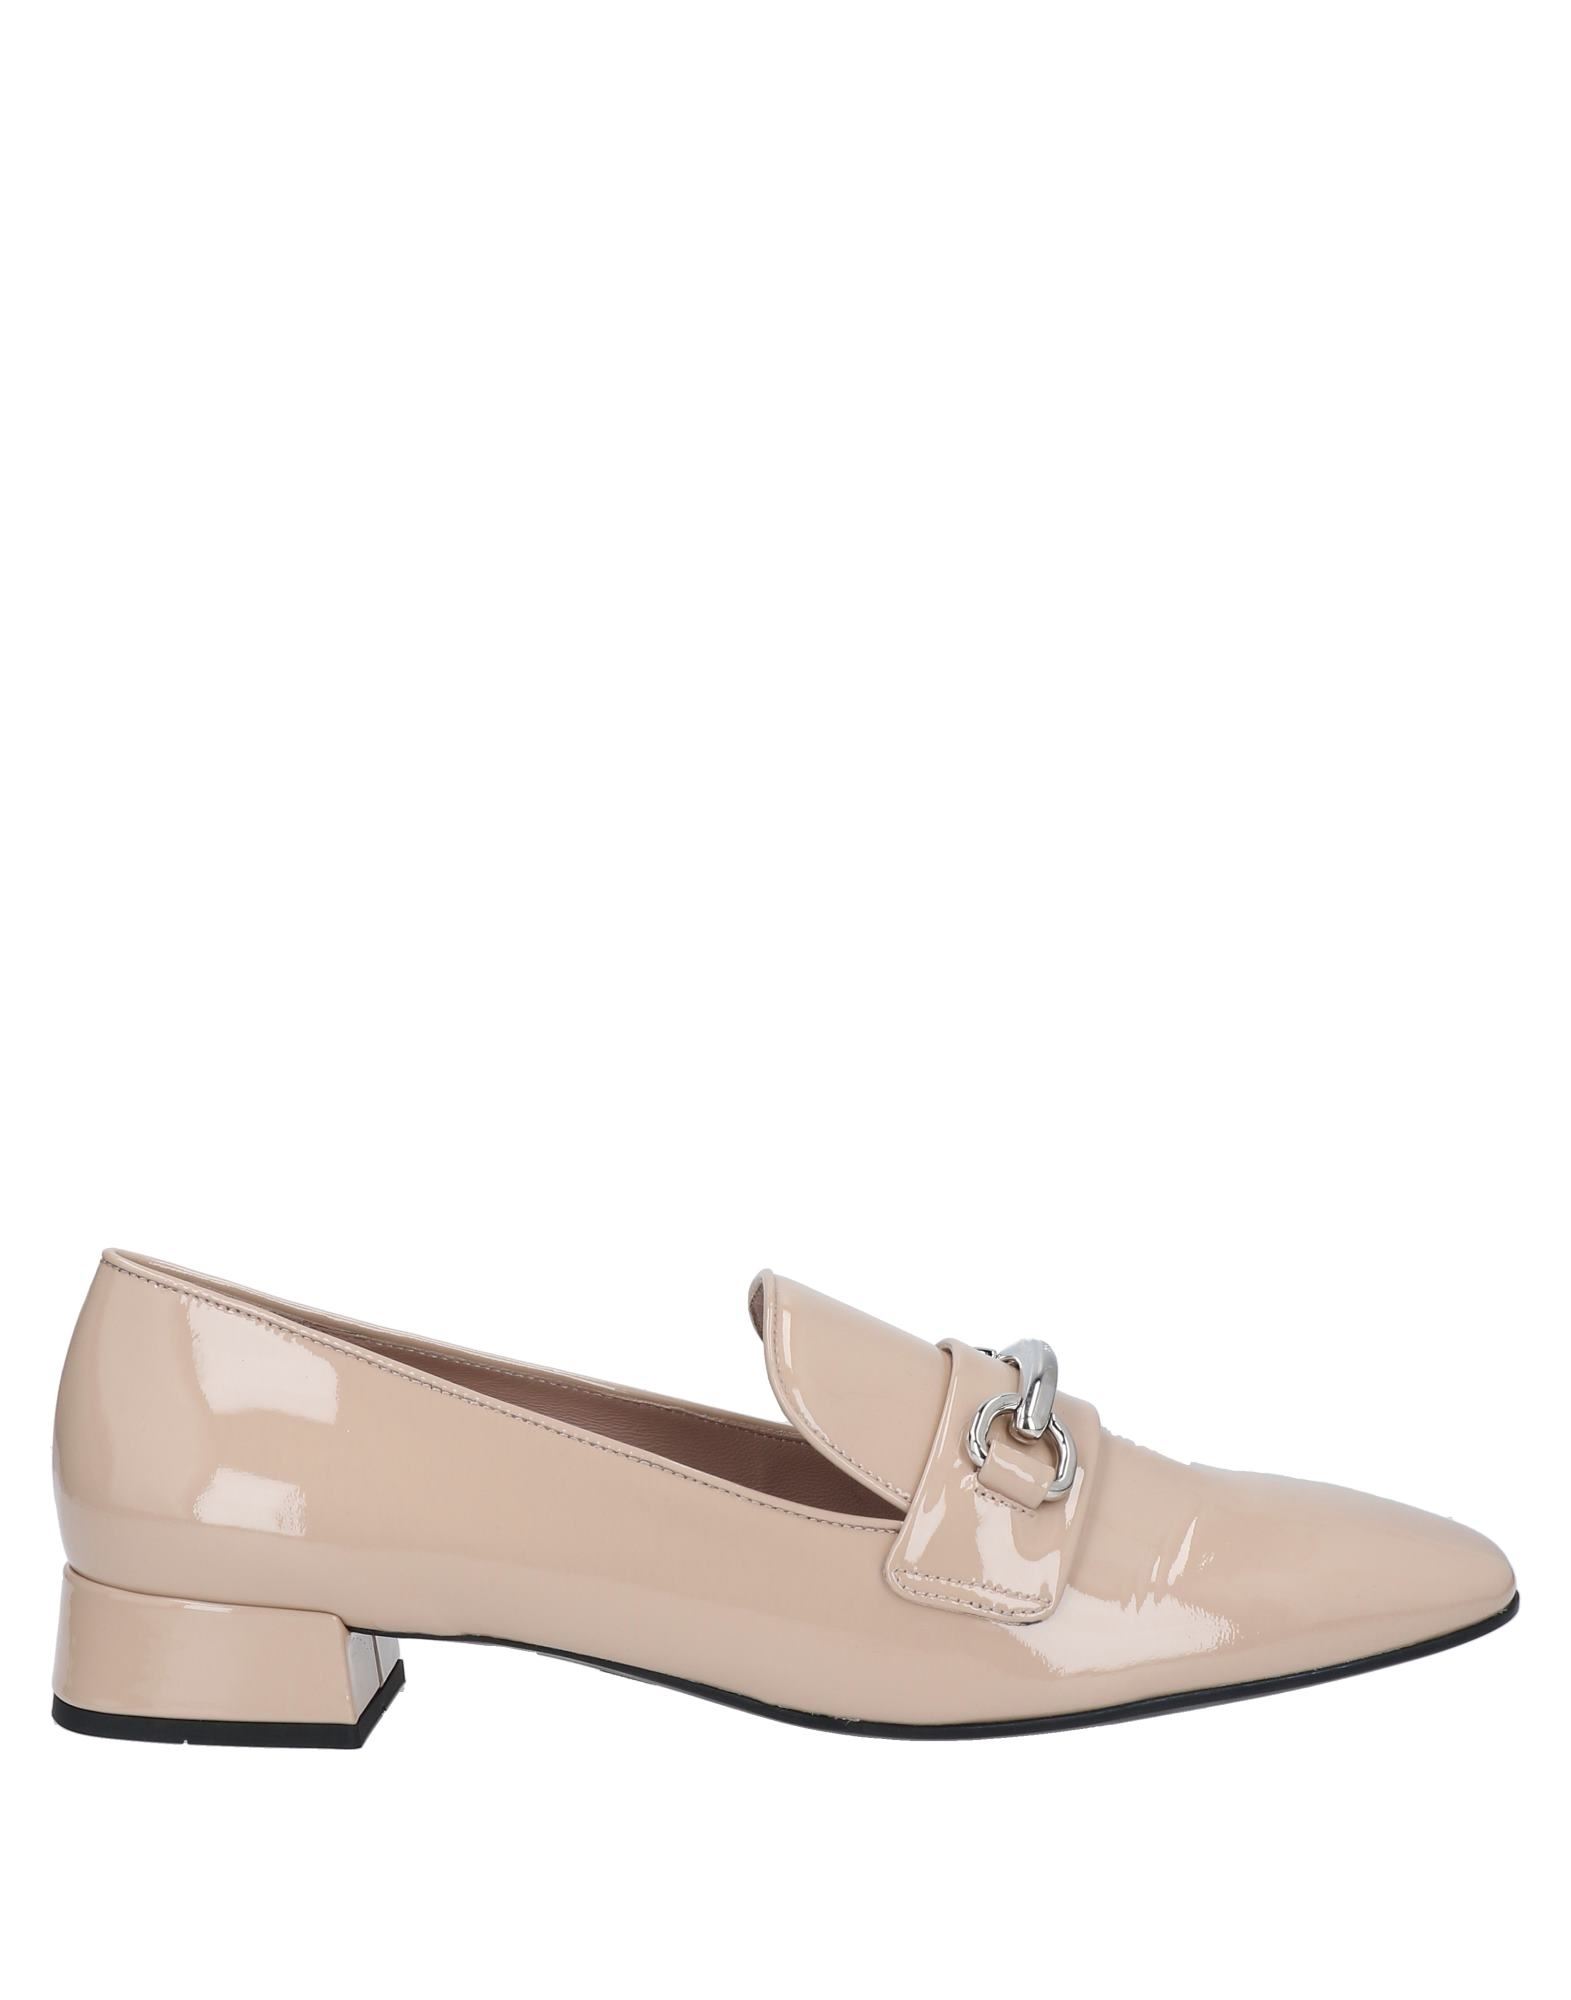 Prada Loafers In Pale Pink